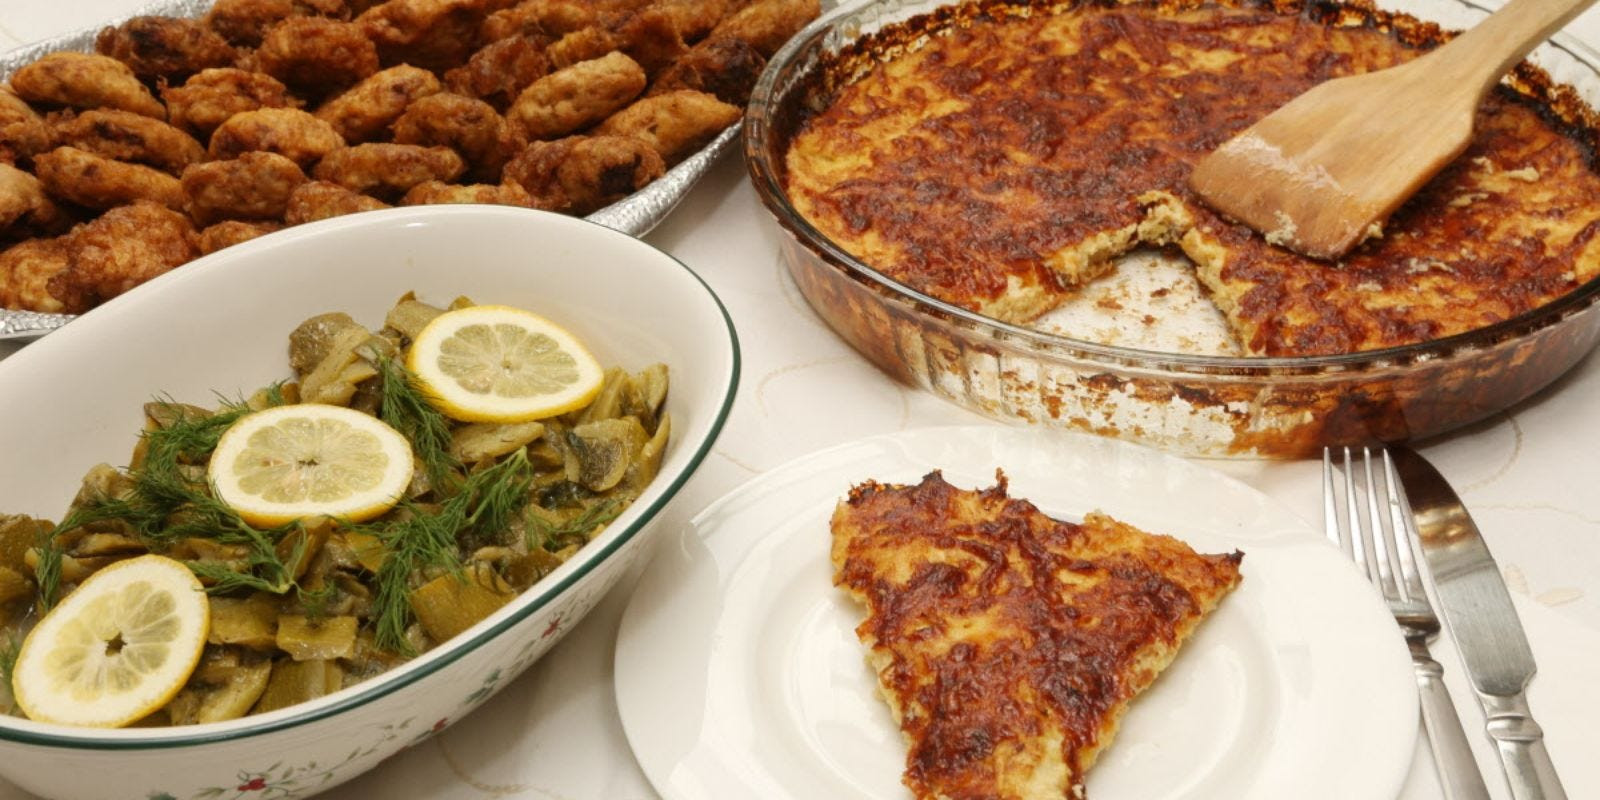 Passover Lunch Ideas
 Passover seder menu ideas with Sephardic flavors